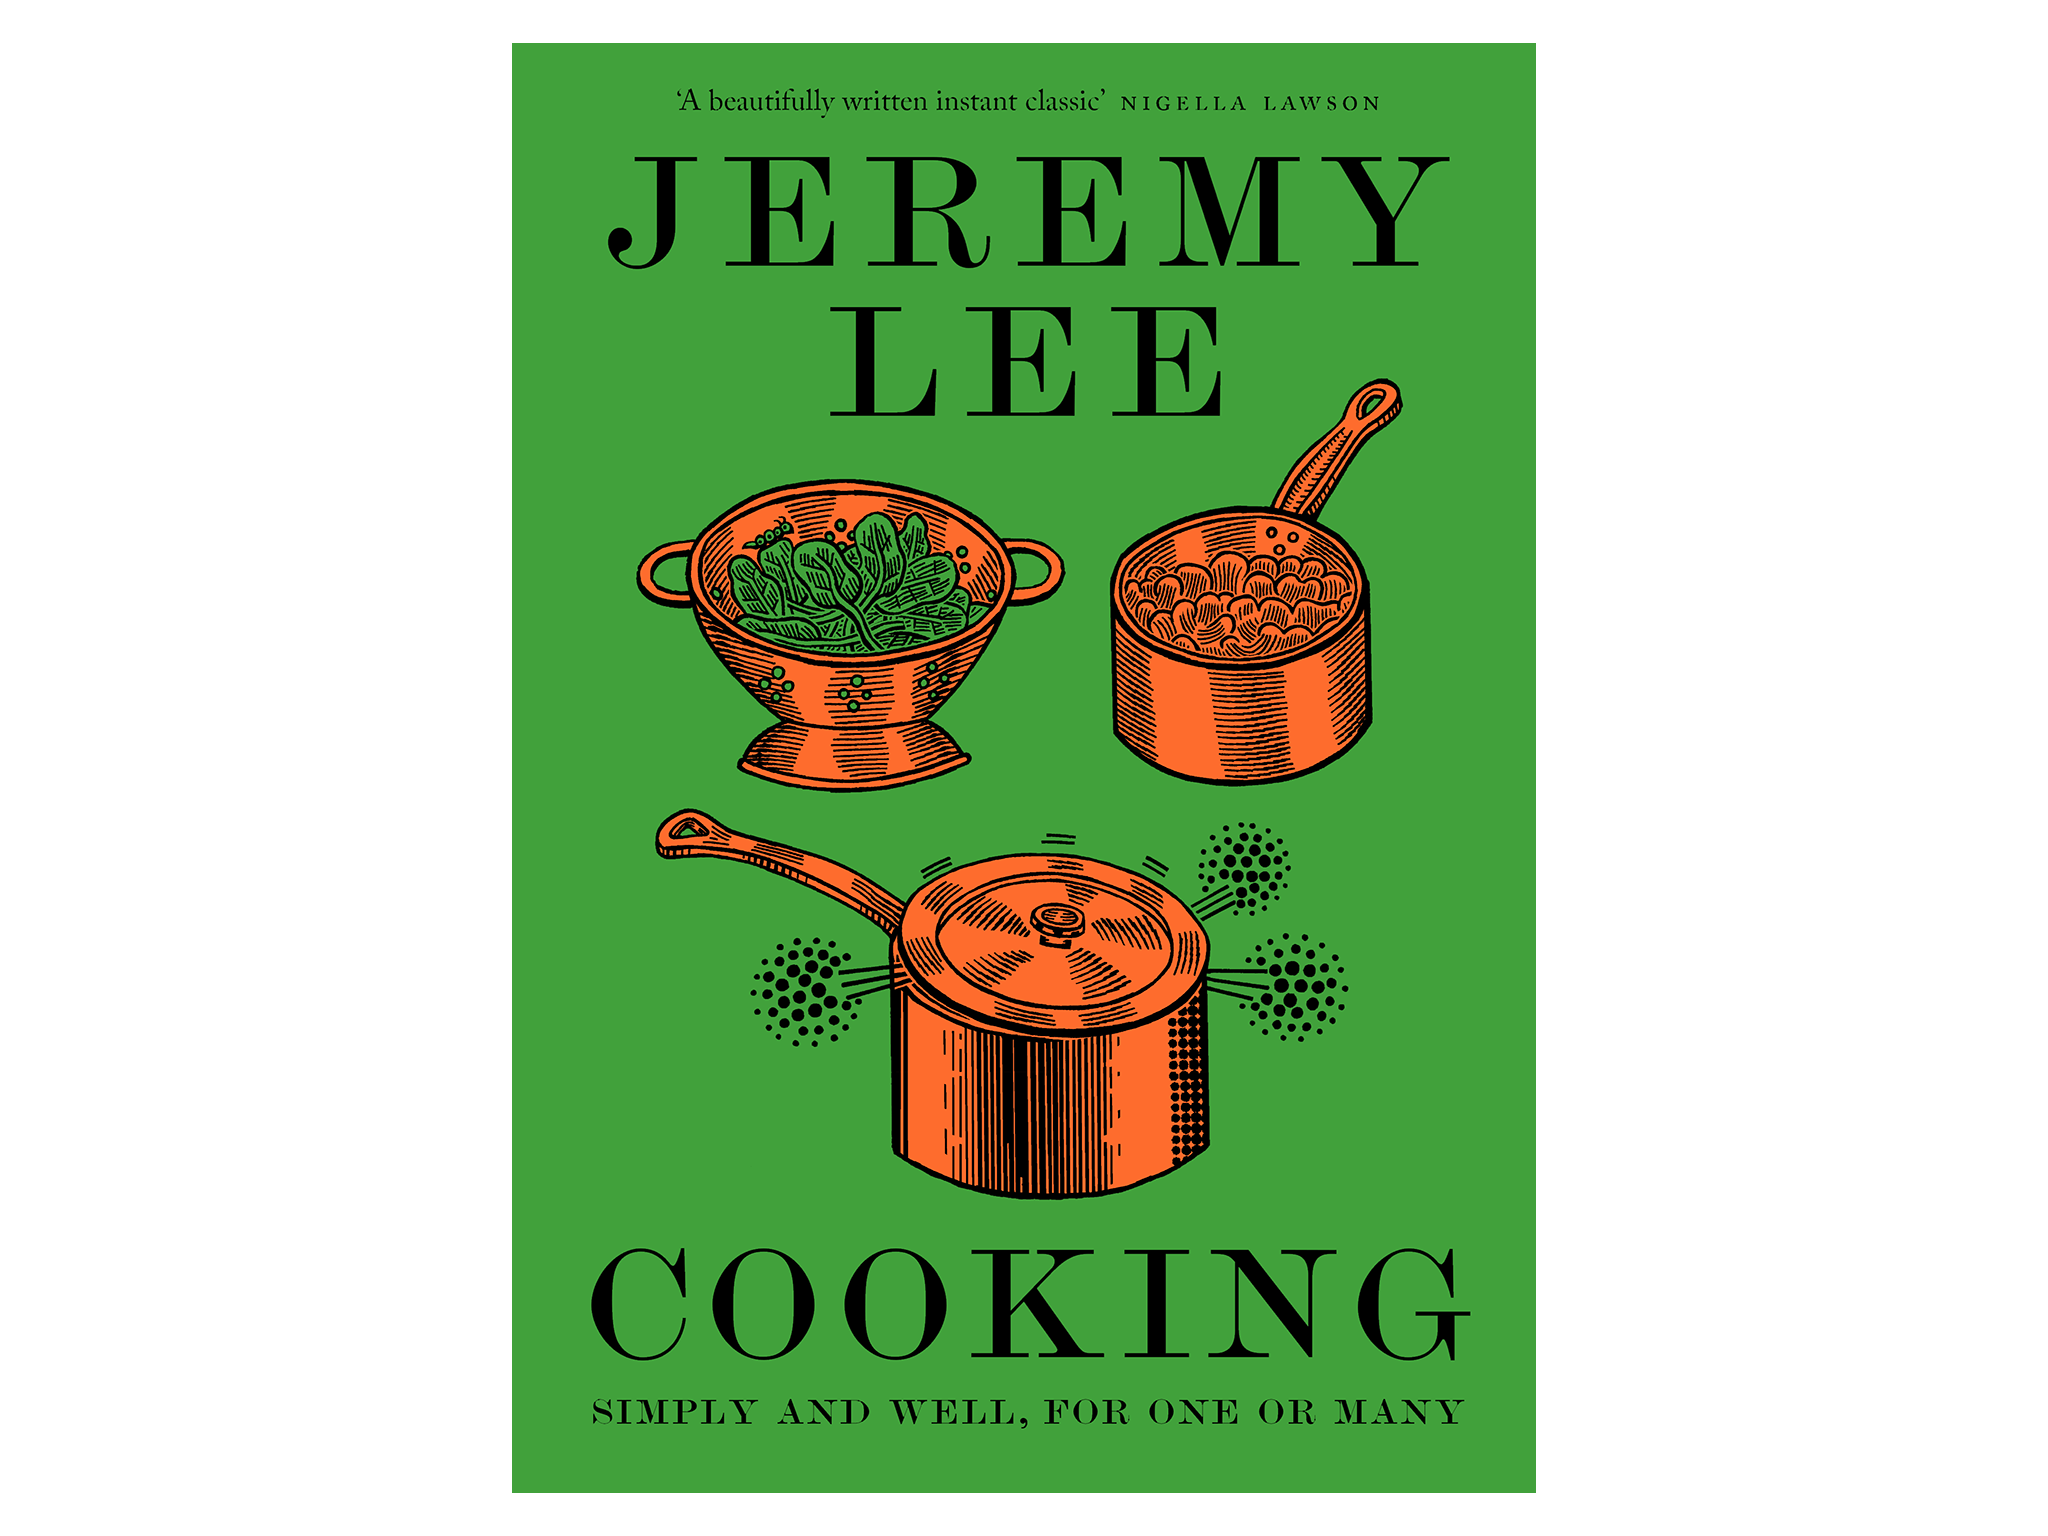 ‘Cooking Simply and Well, For One or Many’ by Jeremy Lee, published by 4th Estate